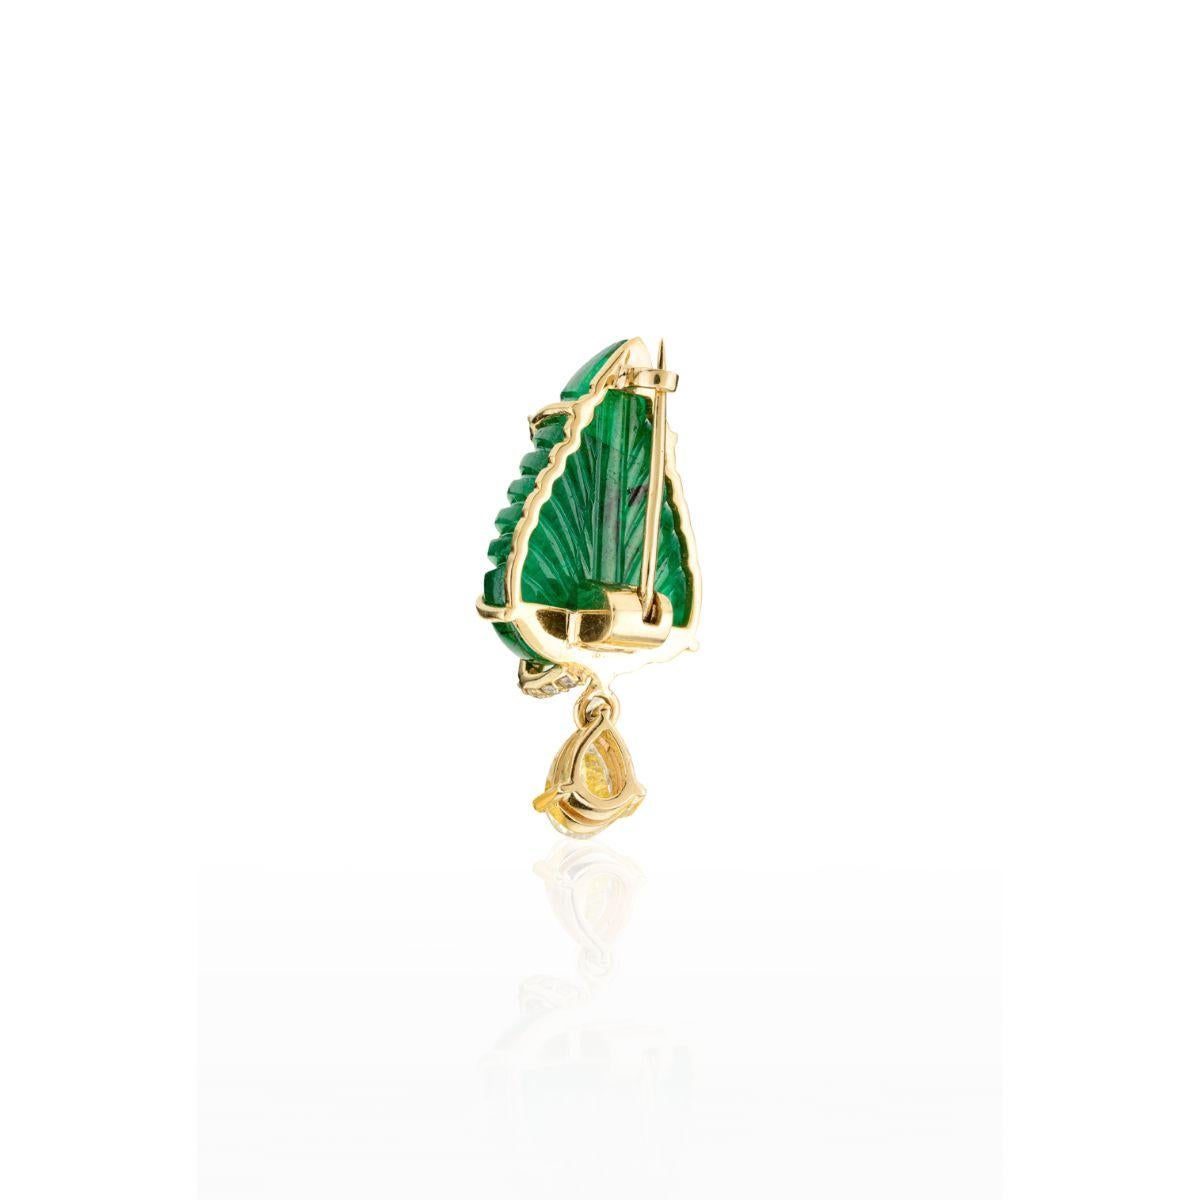 Unisex 9.99 Carat Carved Leaf Emerald Brooch with Diamonds in 18k Yellow Gold In New Condition For Sale In Houston, TX